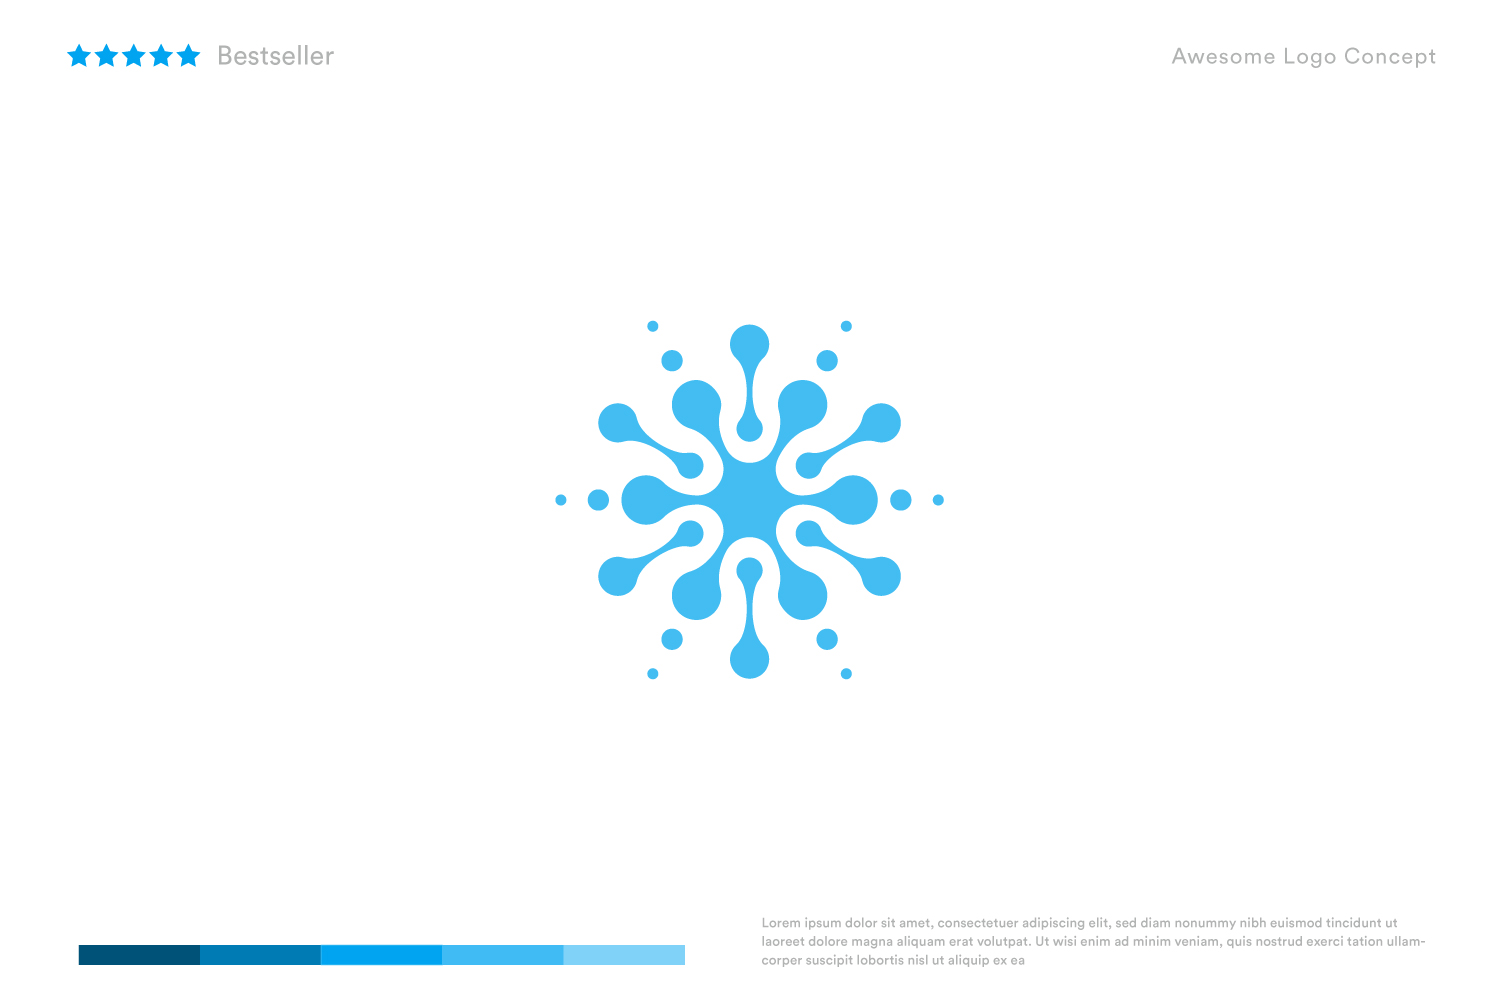 Snowflake, abstract water drop, ice icon, chemical technology logo template.